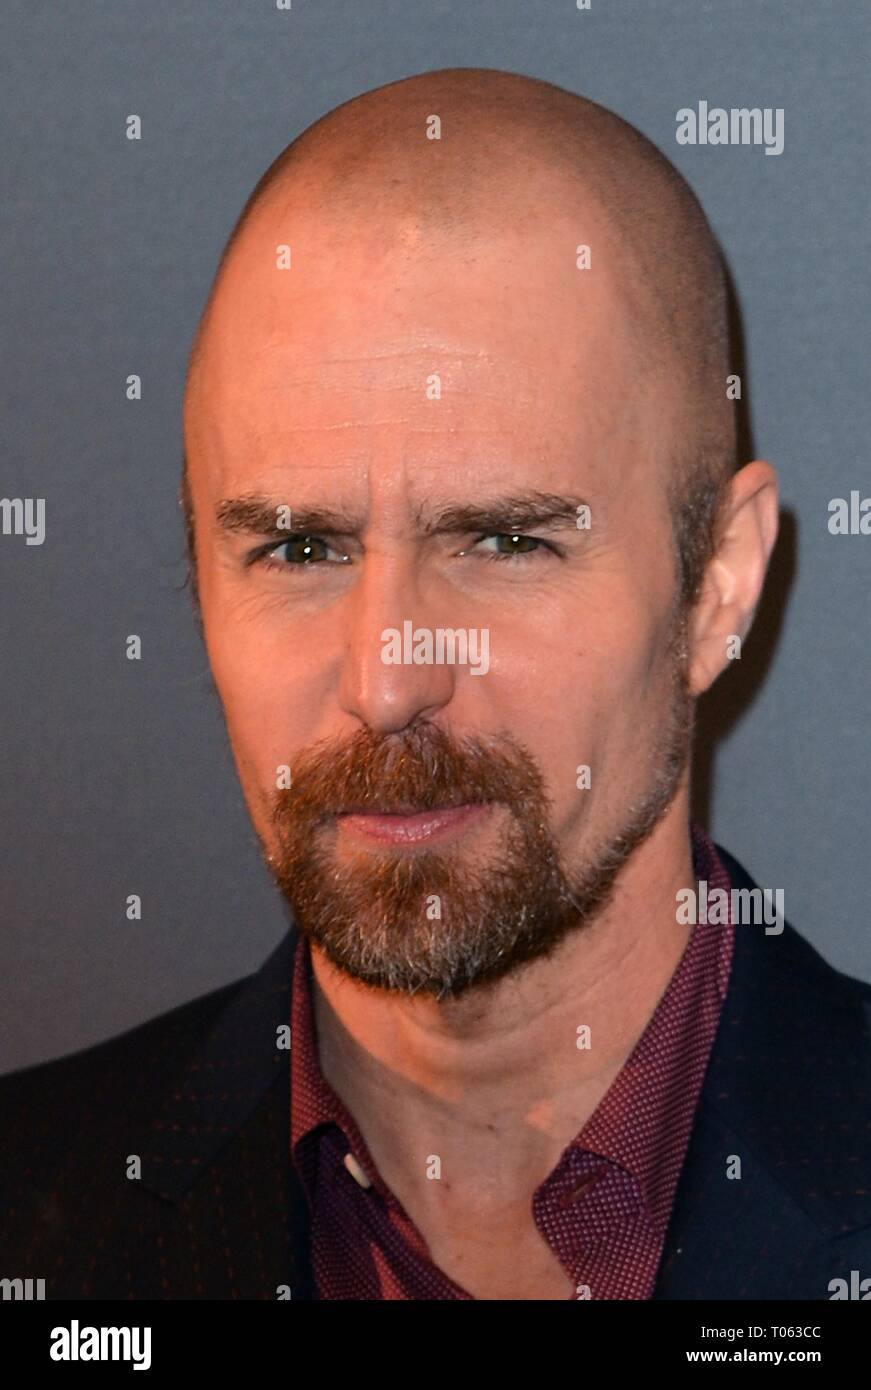 New York, USA. 17th Mar, 2019. Sam Rockwell at arrivals for THE BEST OF ENEMIES Photo Call, The Whitby Hotel Theater, New York, NY March 17, 2019. Credit: Kristin Callahan/Everett Collection/Alamy Live News Stock Photo